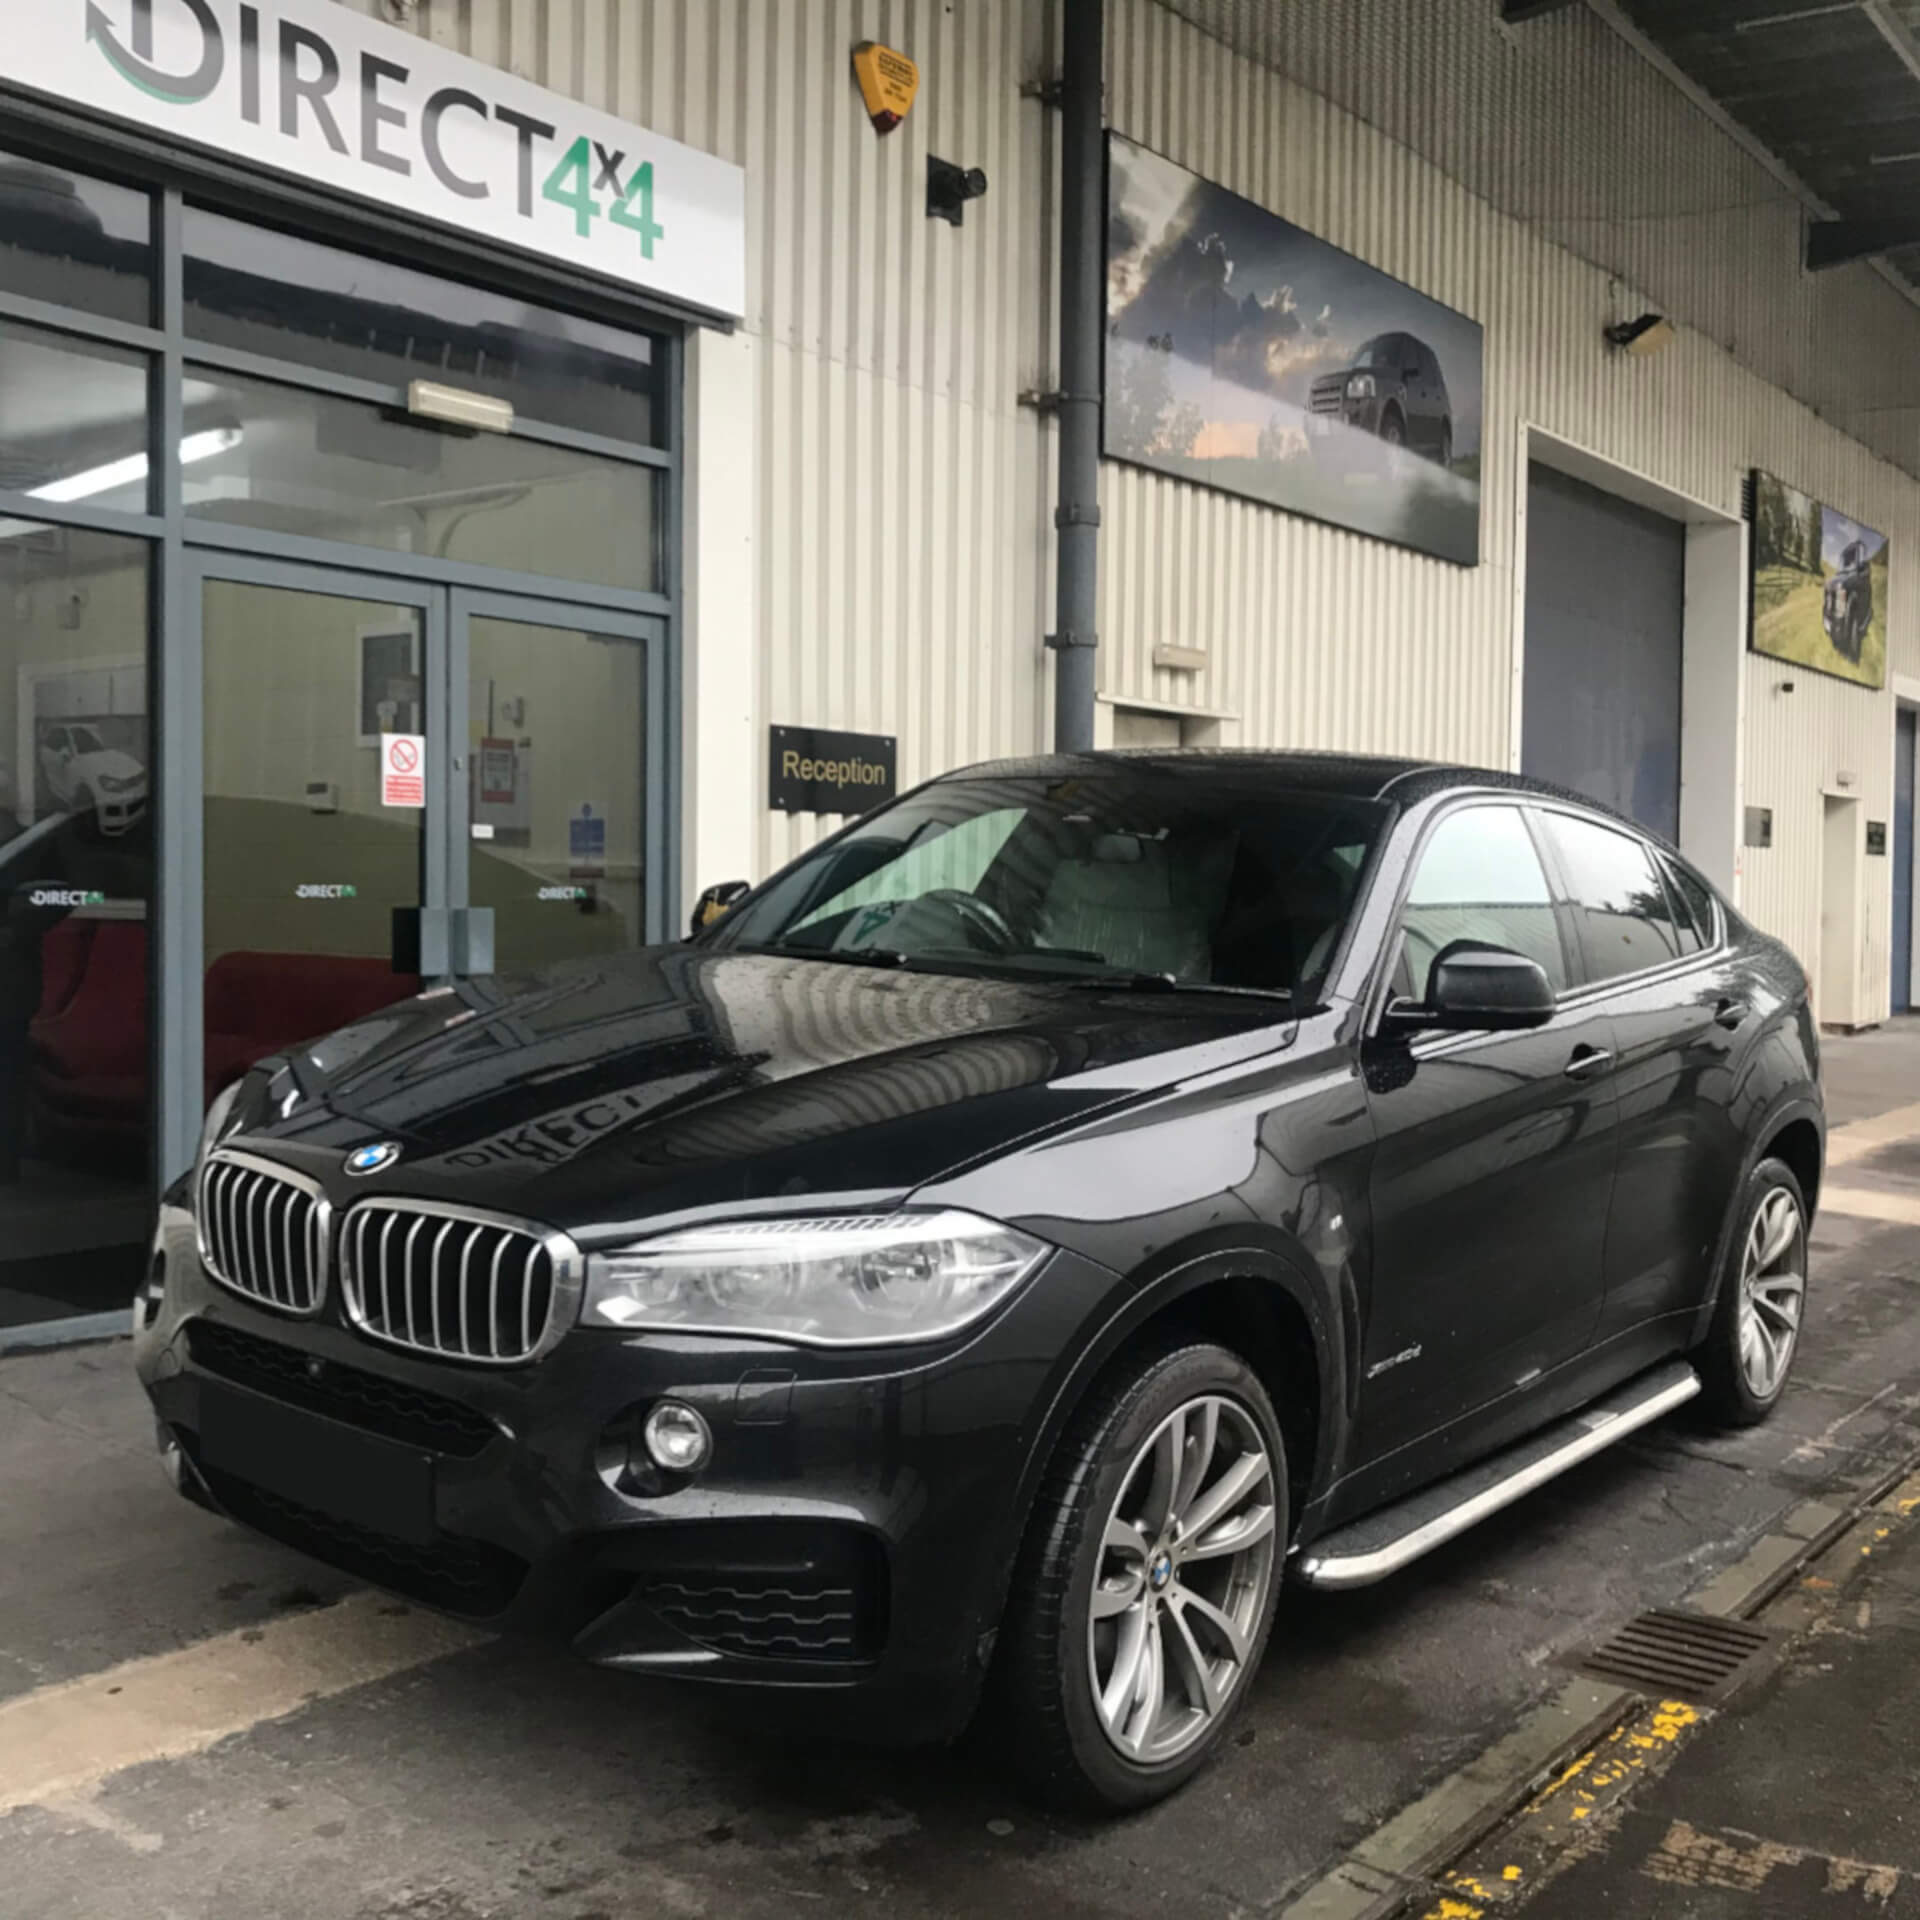 Direct4x4 accessories for BMW X6 vehicles with a photo of high flyer side steps fitted to a BMW X6 outside our depot